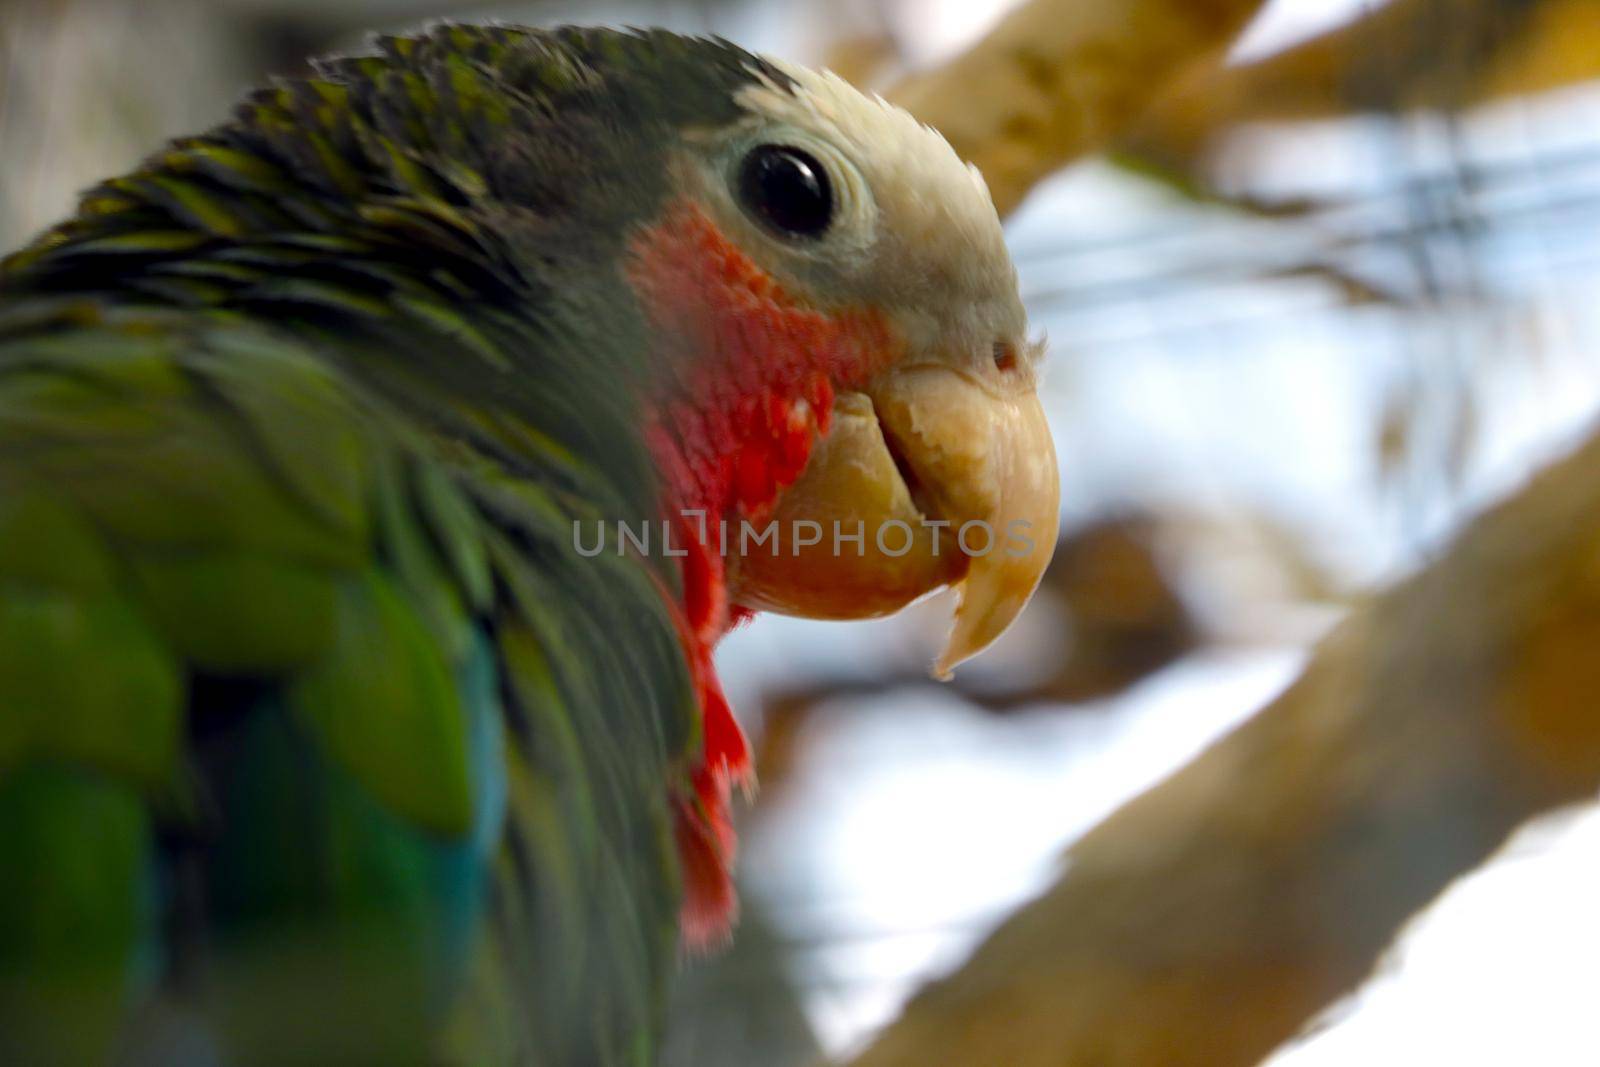 On the branch sits a beautiful domestic parrot. by kip02kas